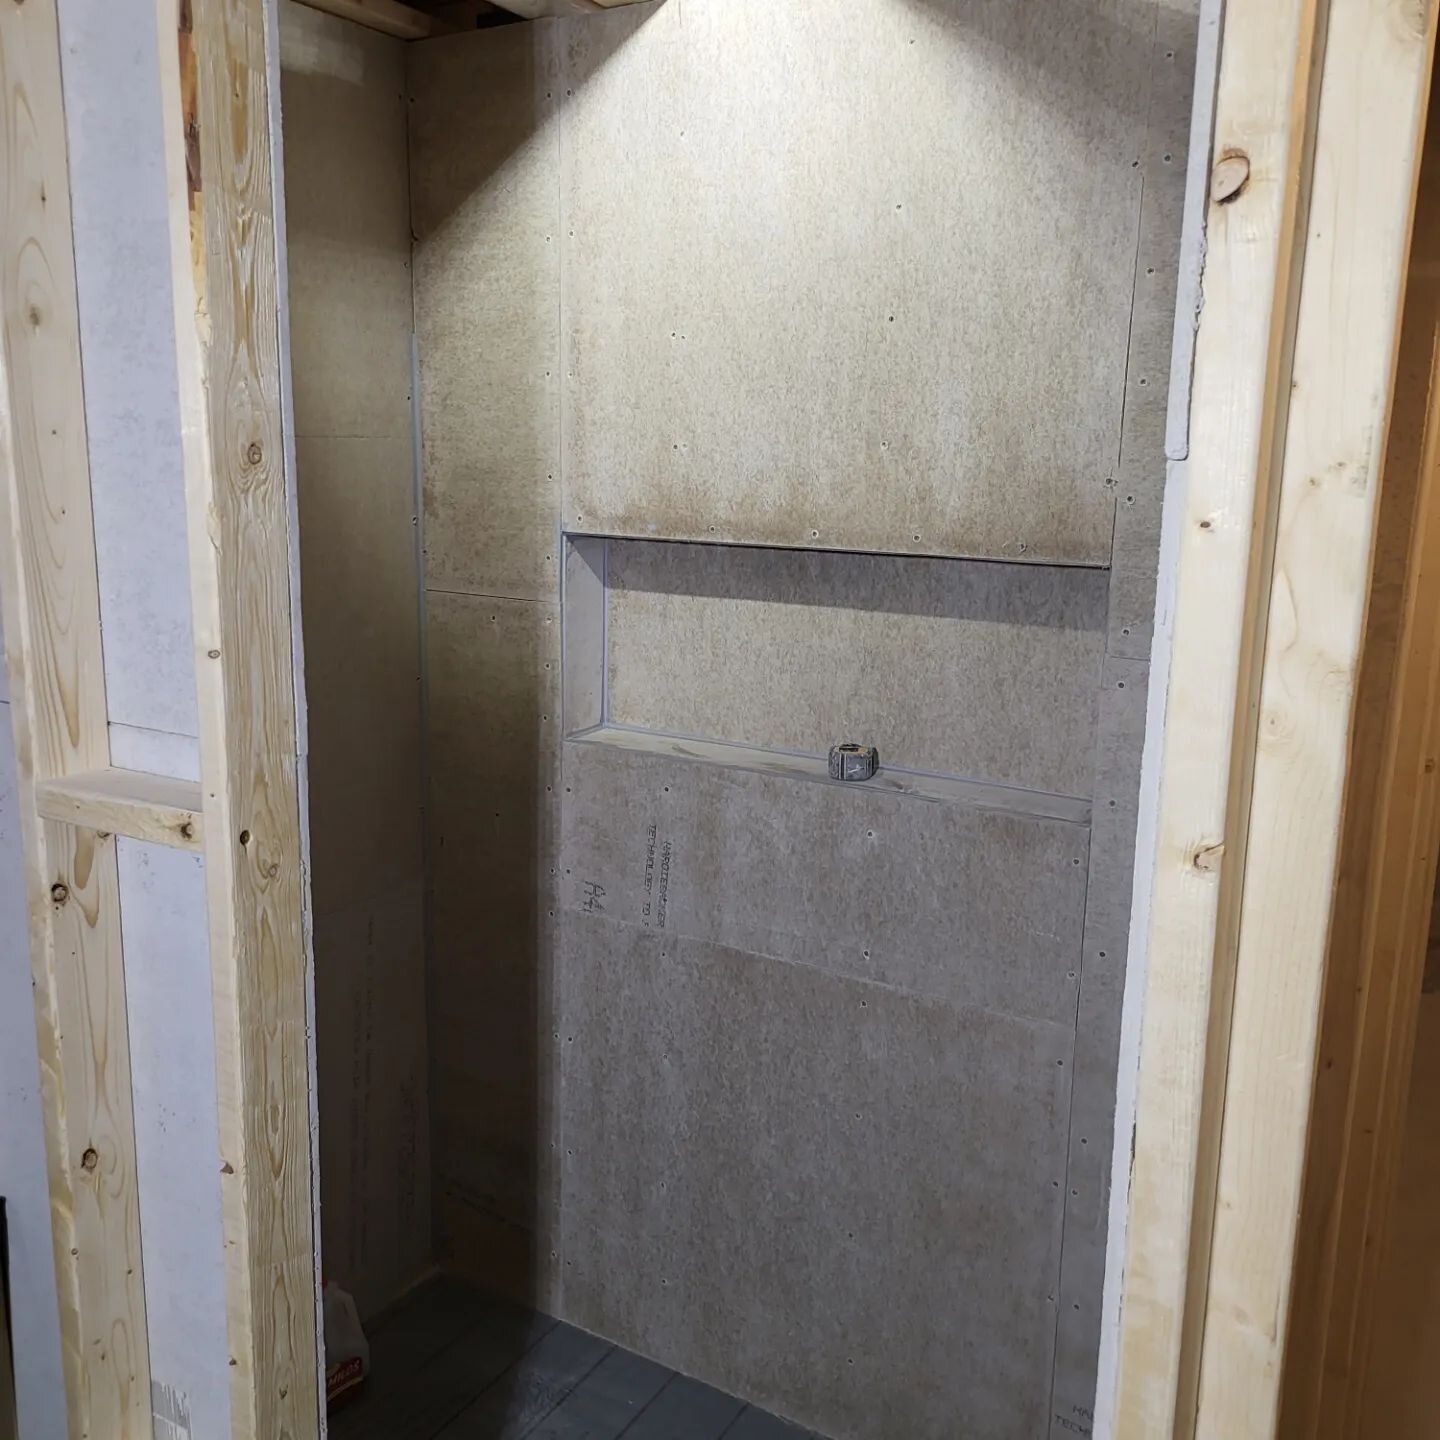 Another shower in the works. Building this bathroom from scratch in a basement!  Coming along nicely. 

#tile 
#bathroomdesign 
#basementremodel 
#basementbathroom 
#selfemployed 
#smallbusiness